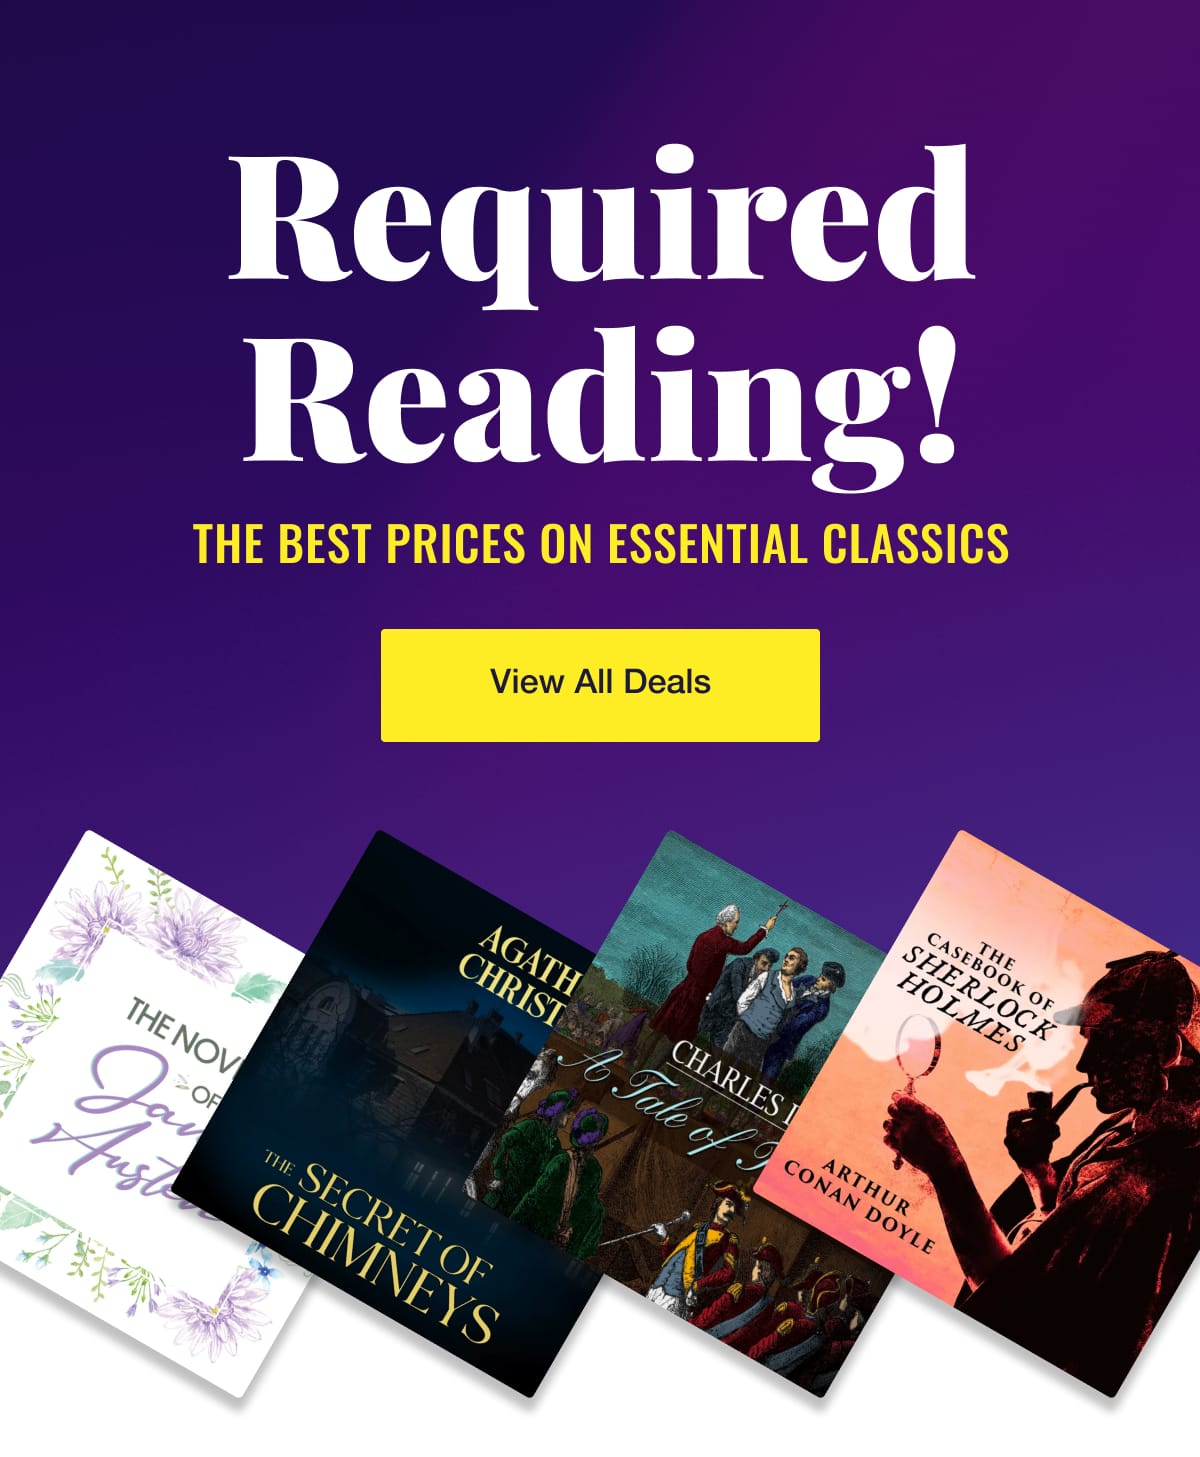 Prices just slashed! Massive Sale on Classics! Buy 2 Get 1 Free. View Deals. Lowest-priced item is free. Only valid for select books. May not be combined with other promotions.